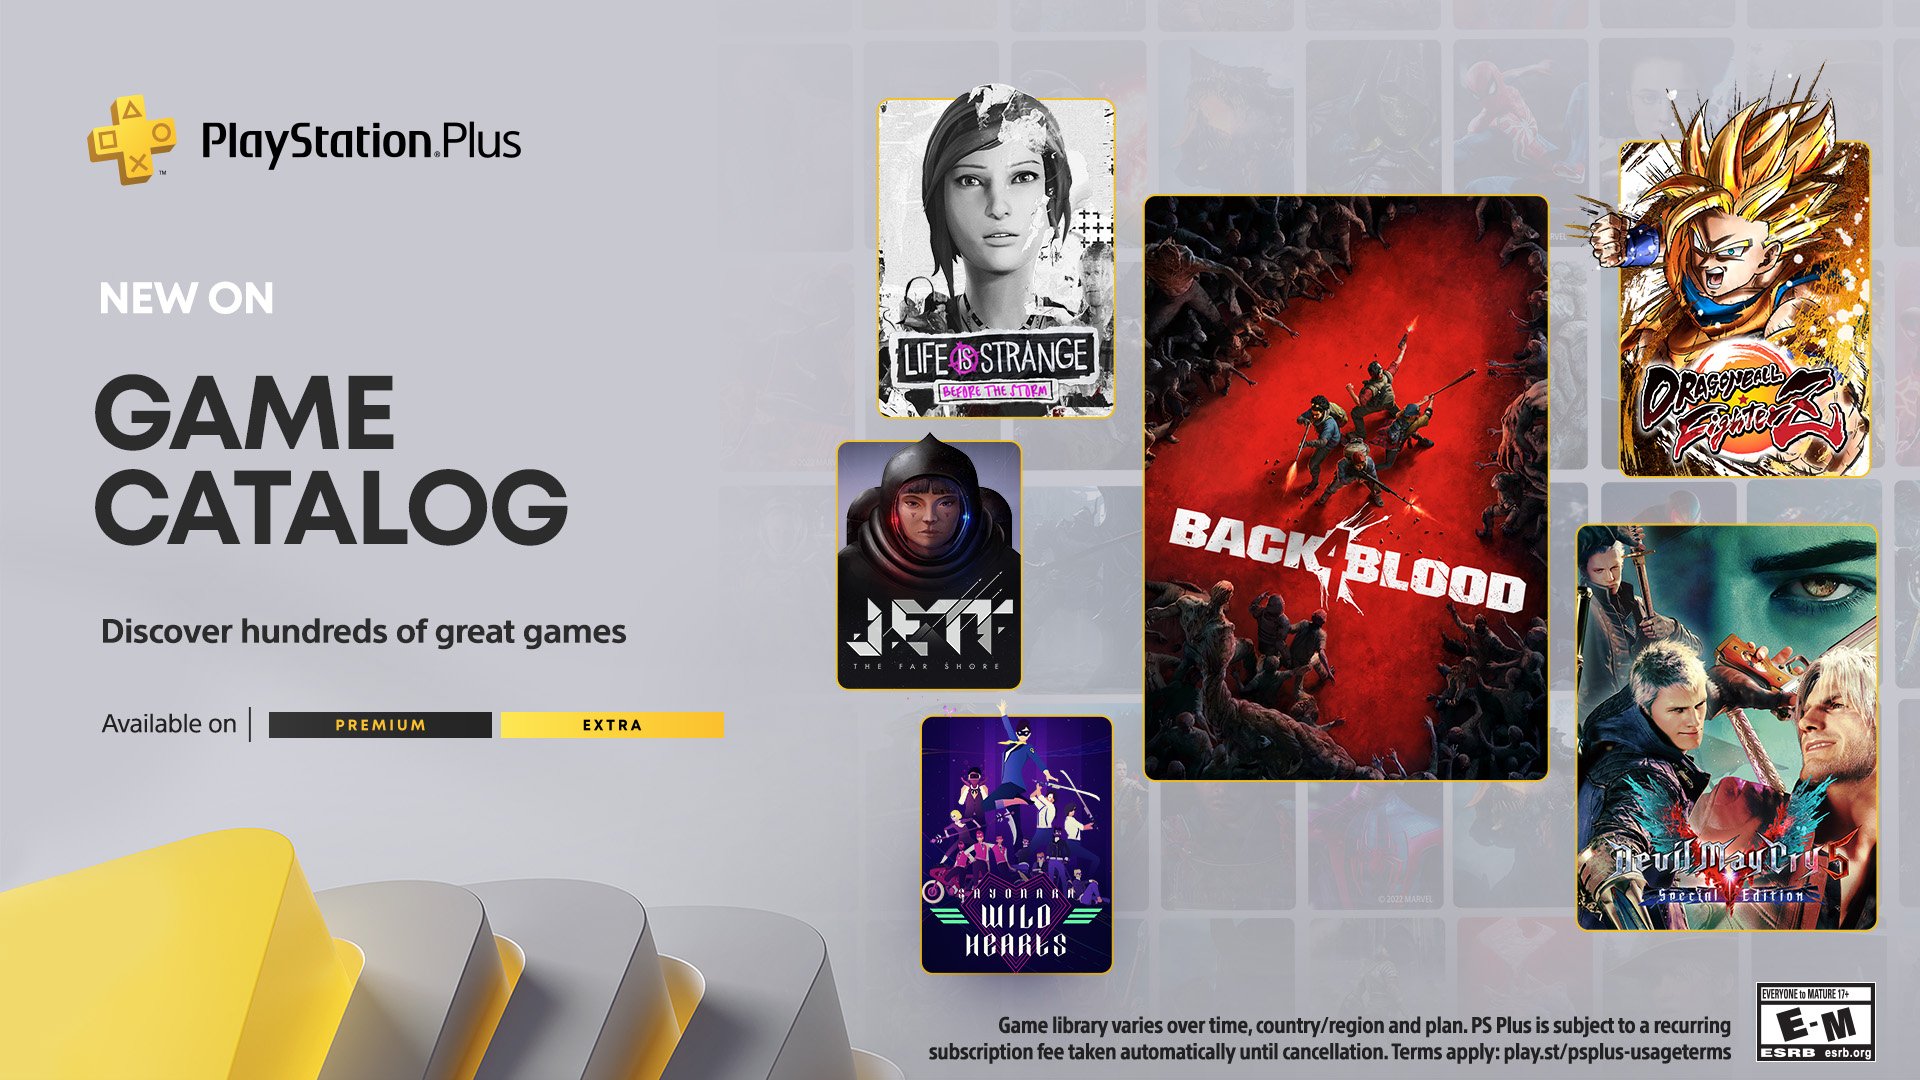 PlayStation Plus free games for February include Not a Hero and